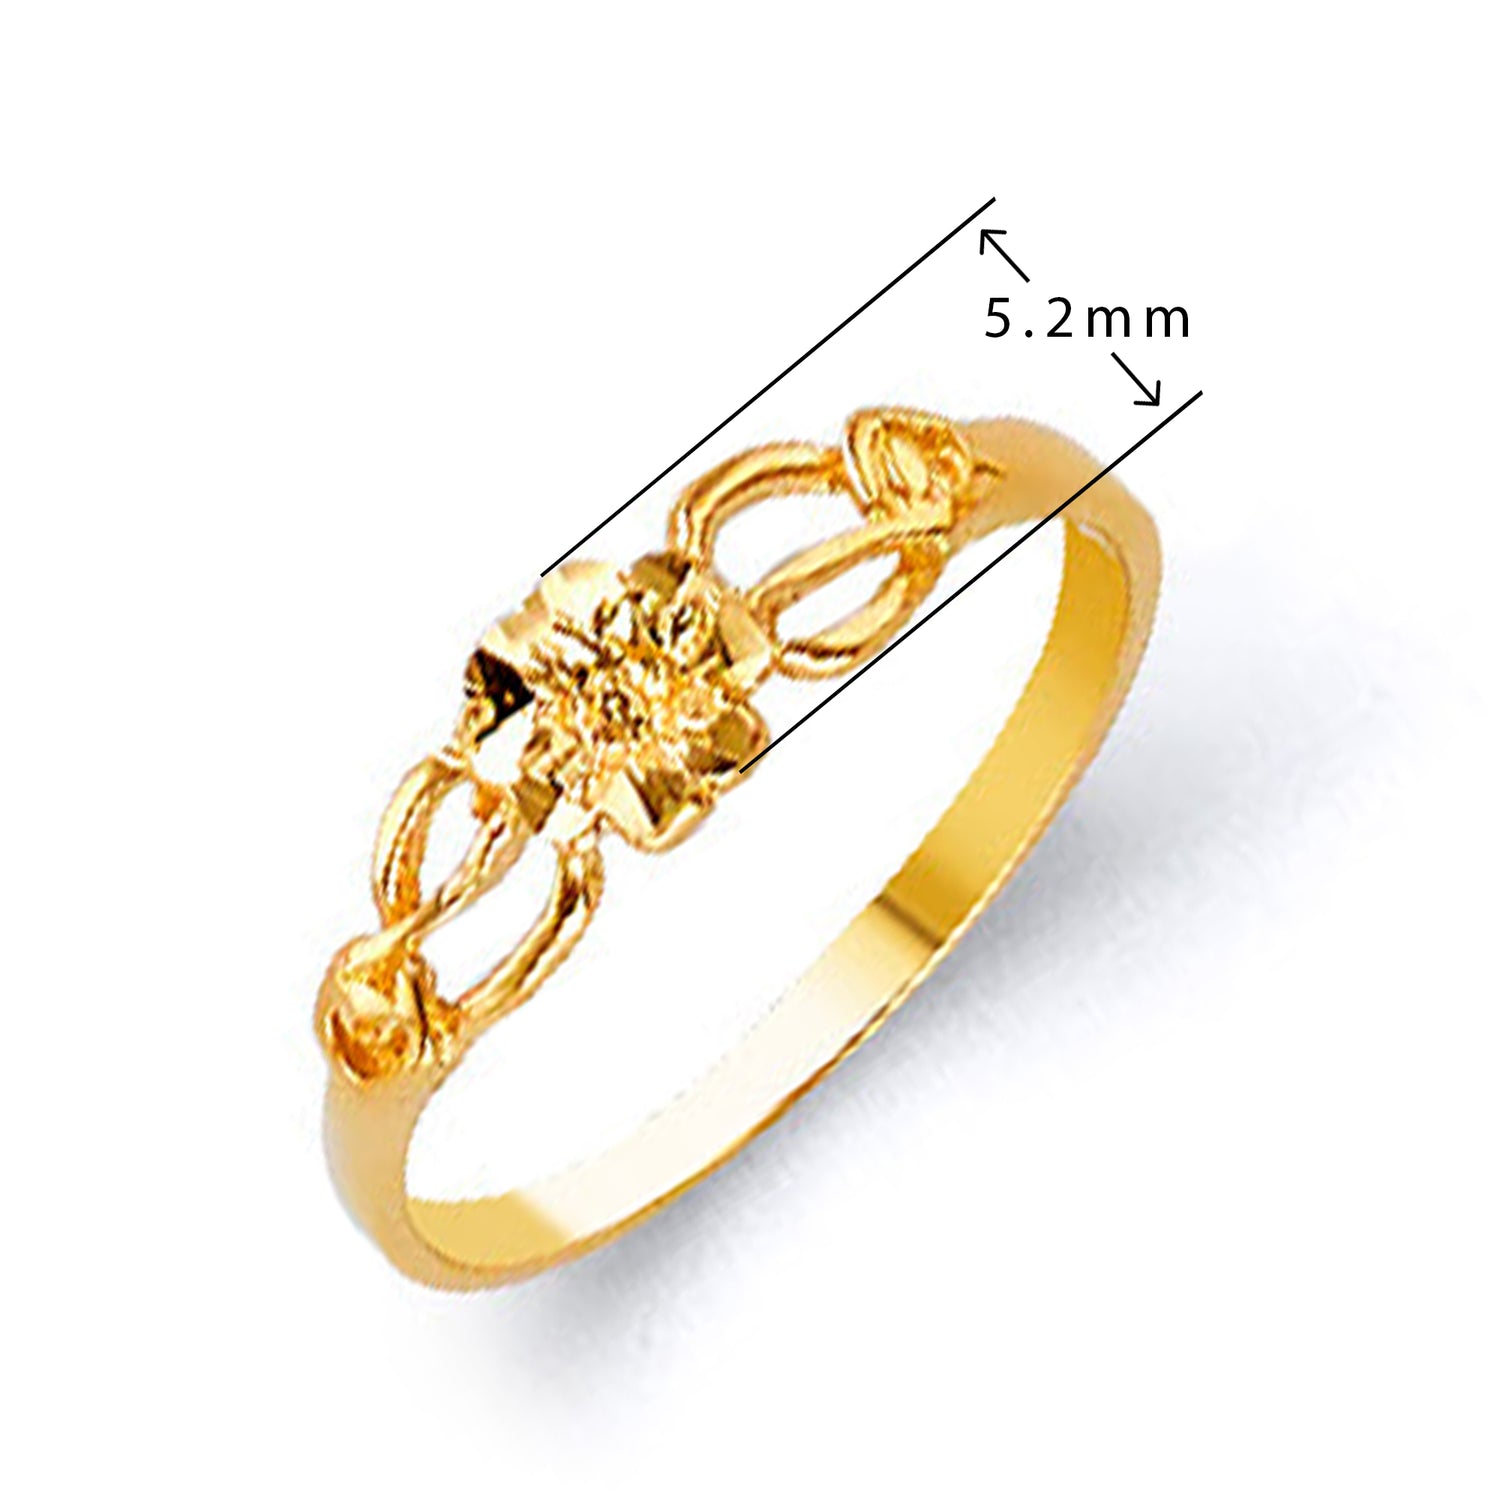 Fancy East-west Embroidery Ring in Solid Gold with Measurement